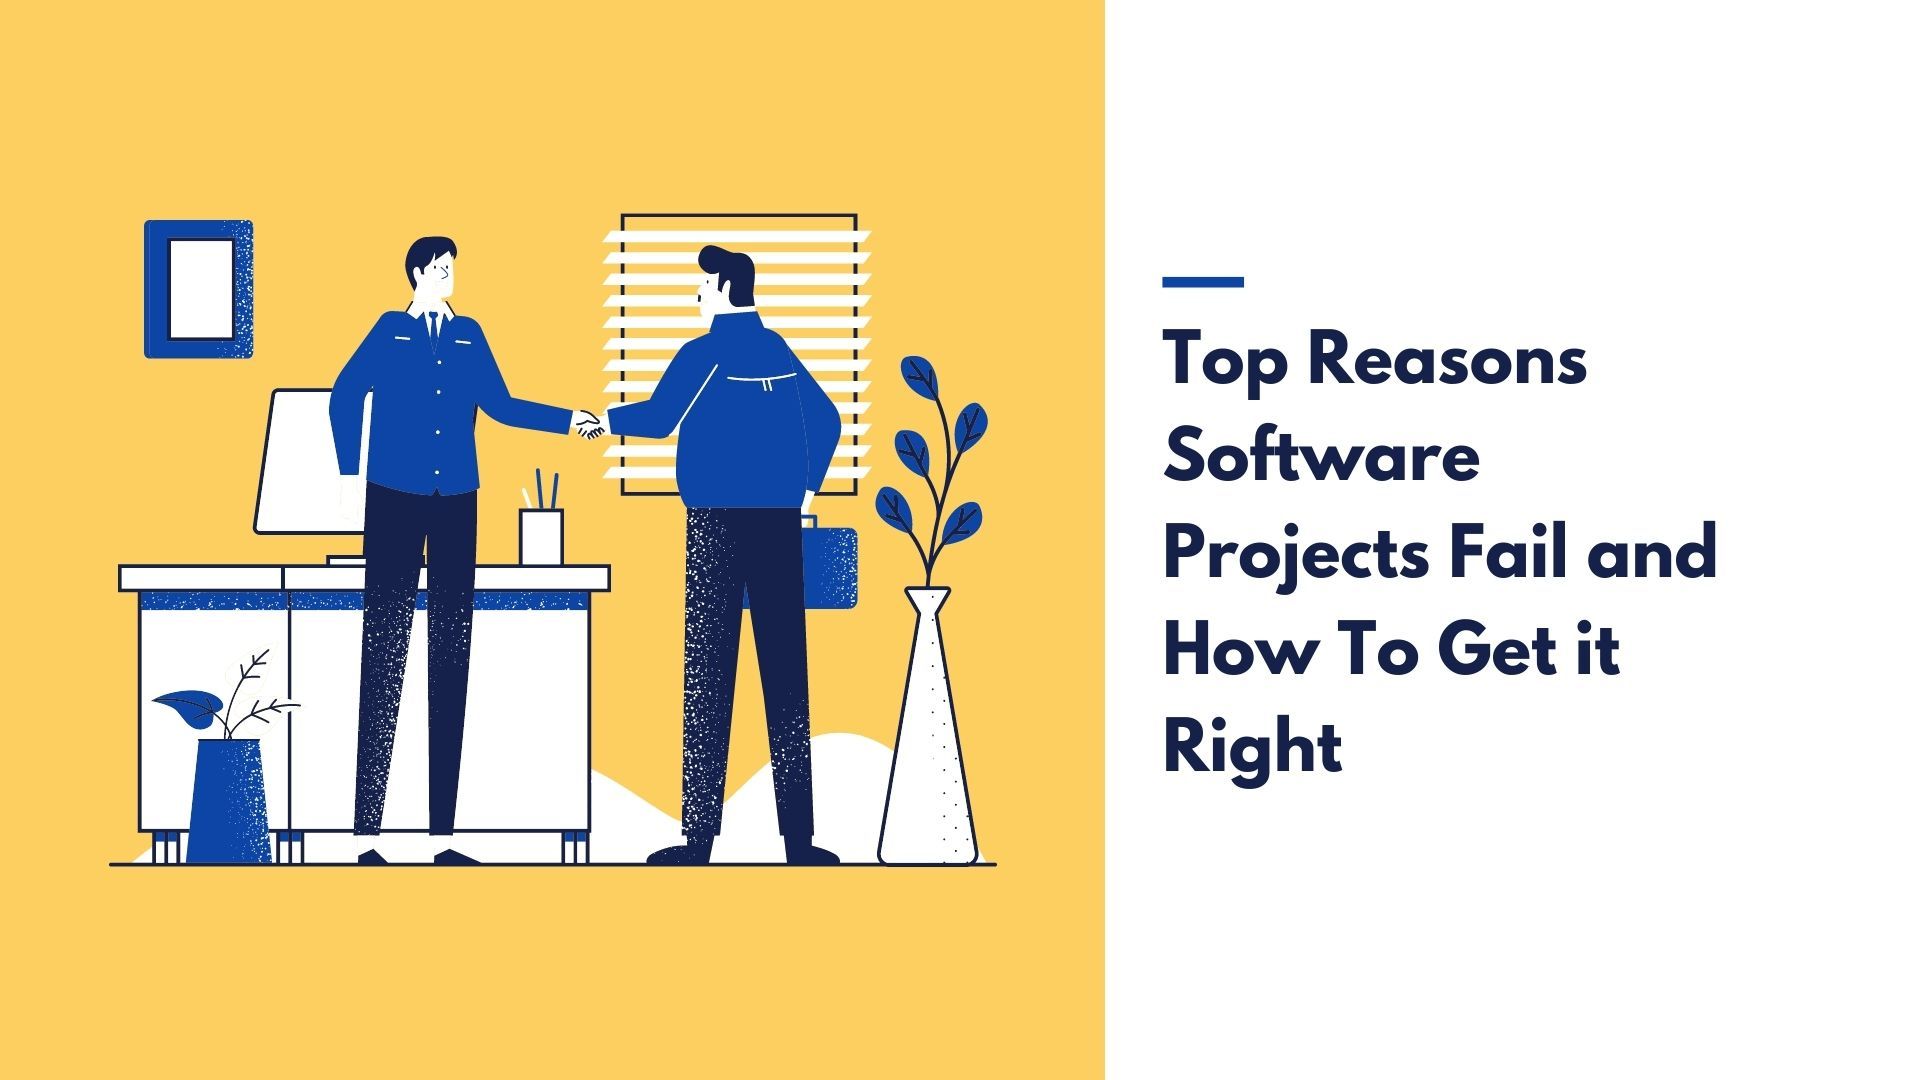 Why Software Projects Fail and How To Get it Right